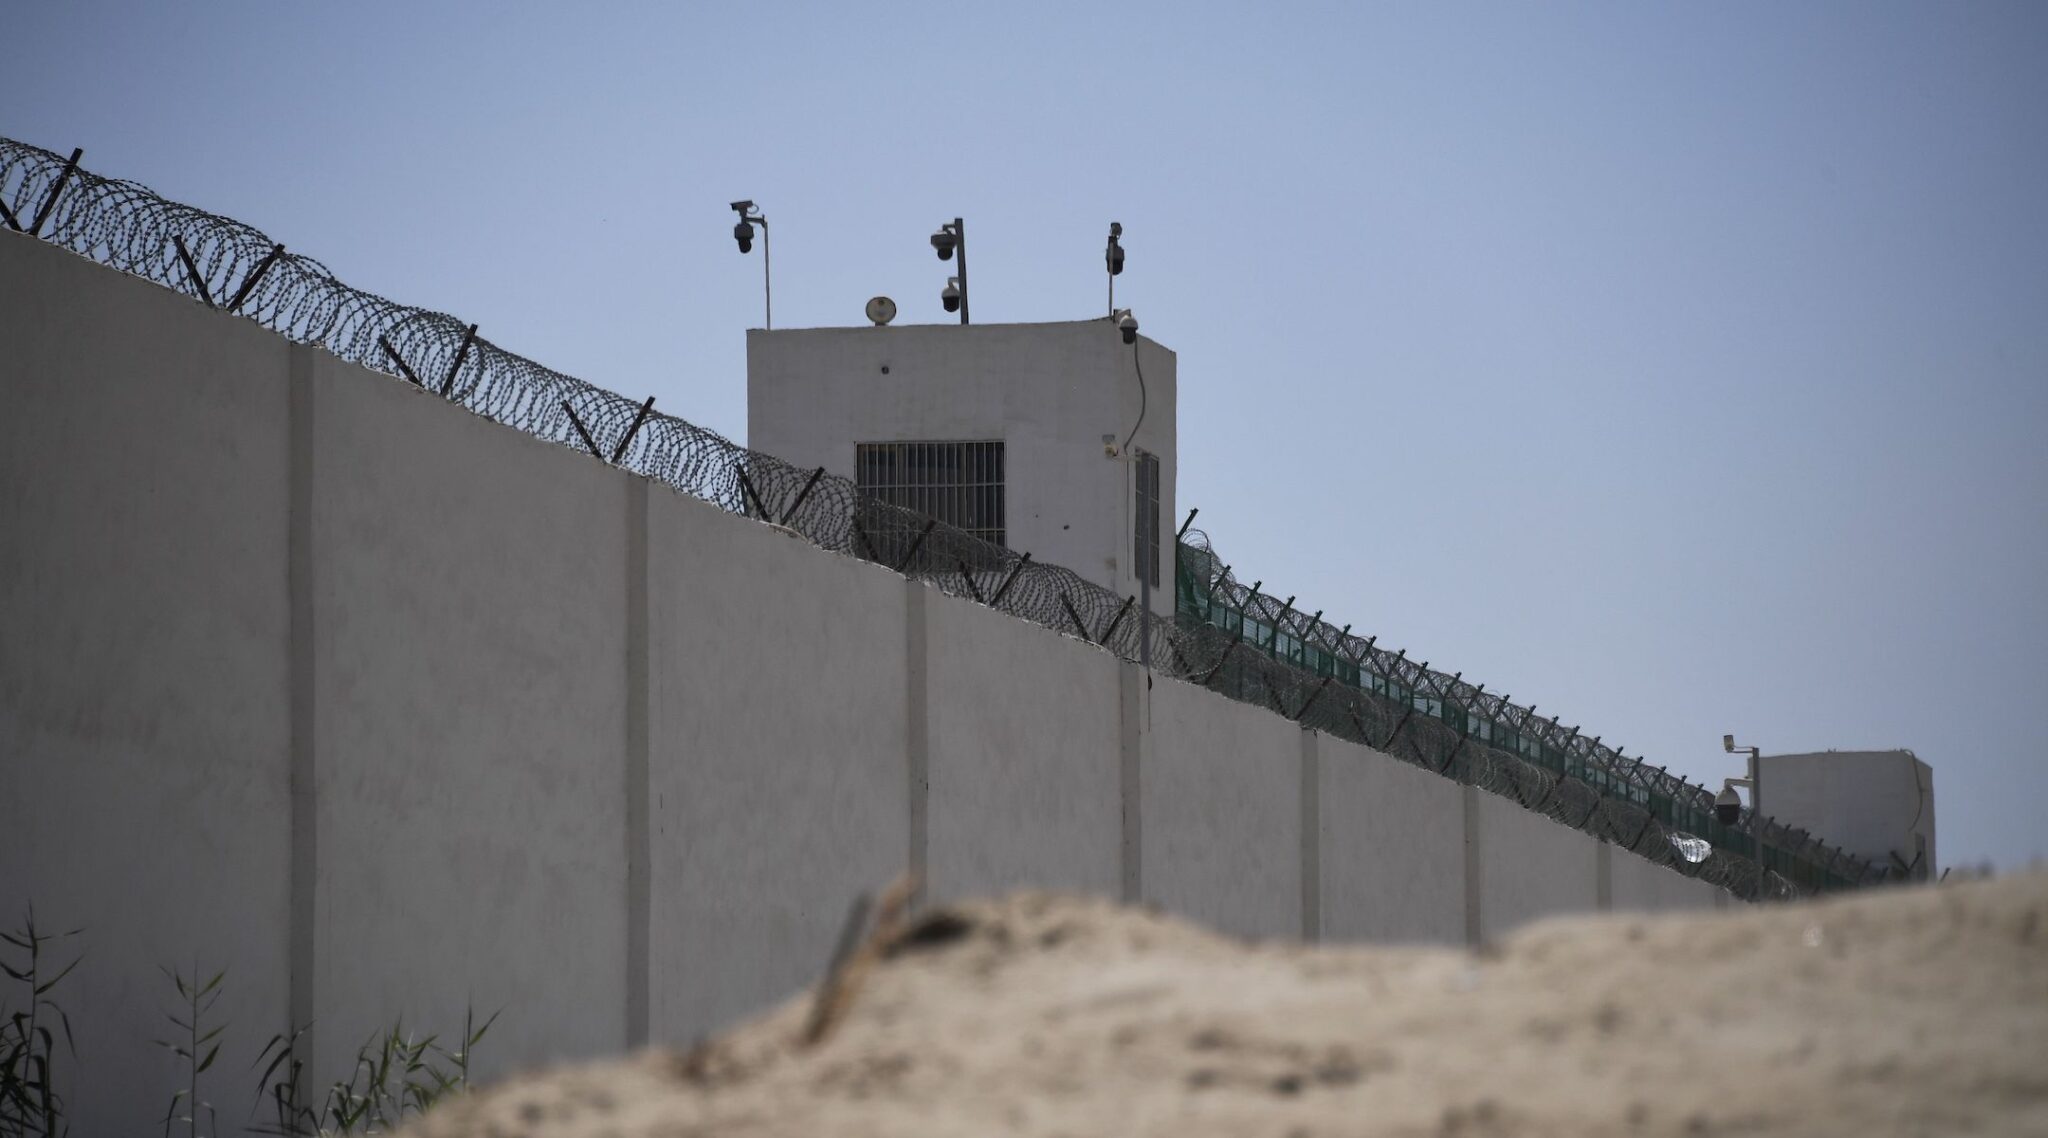 This photo taken on May 31, 2019 shows the outer wall of a complex that includes what is believed to be an internment camp full of ethnic Muslims, on the outskirts of Hotan, in China’s northwestern Xinjiang region. (Greg Baker/AFP via Getty Images)